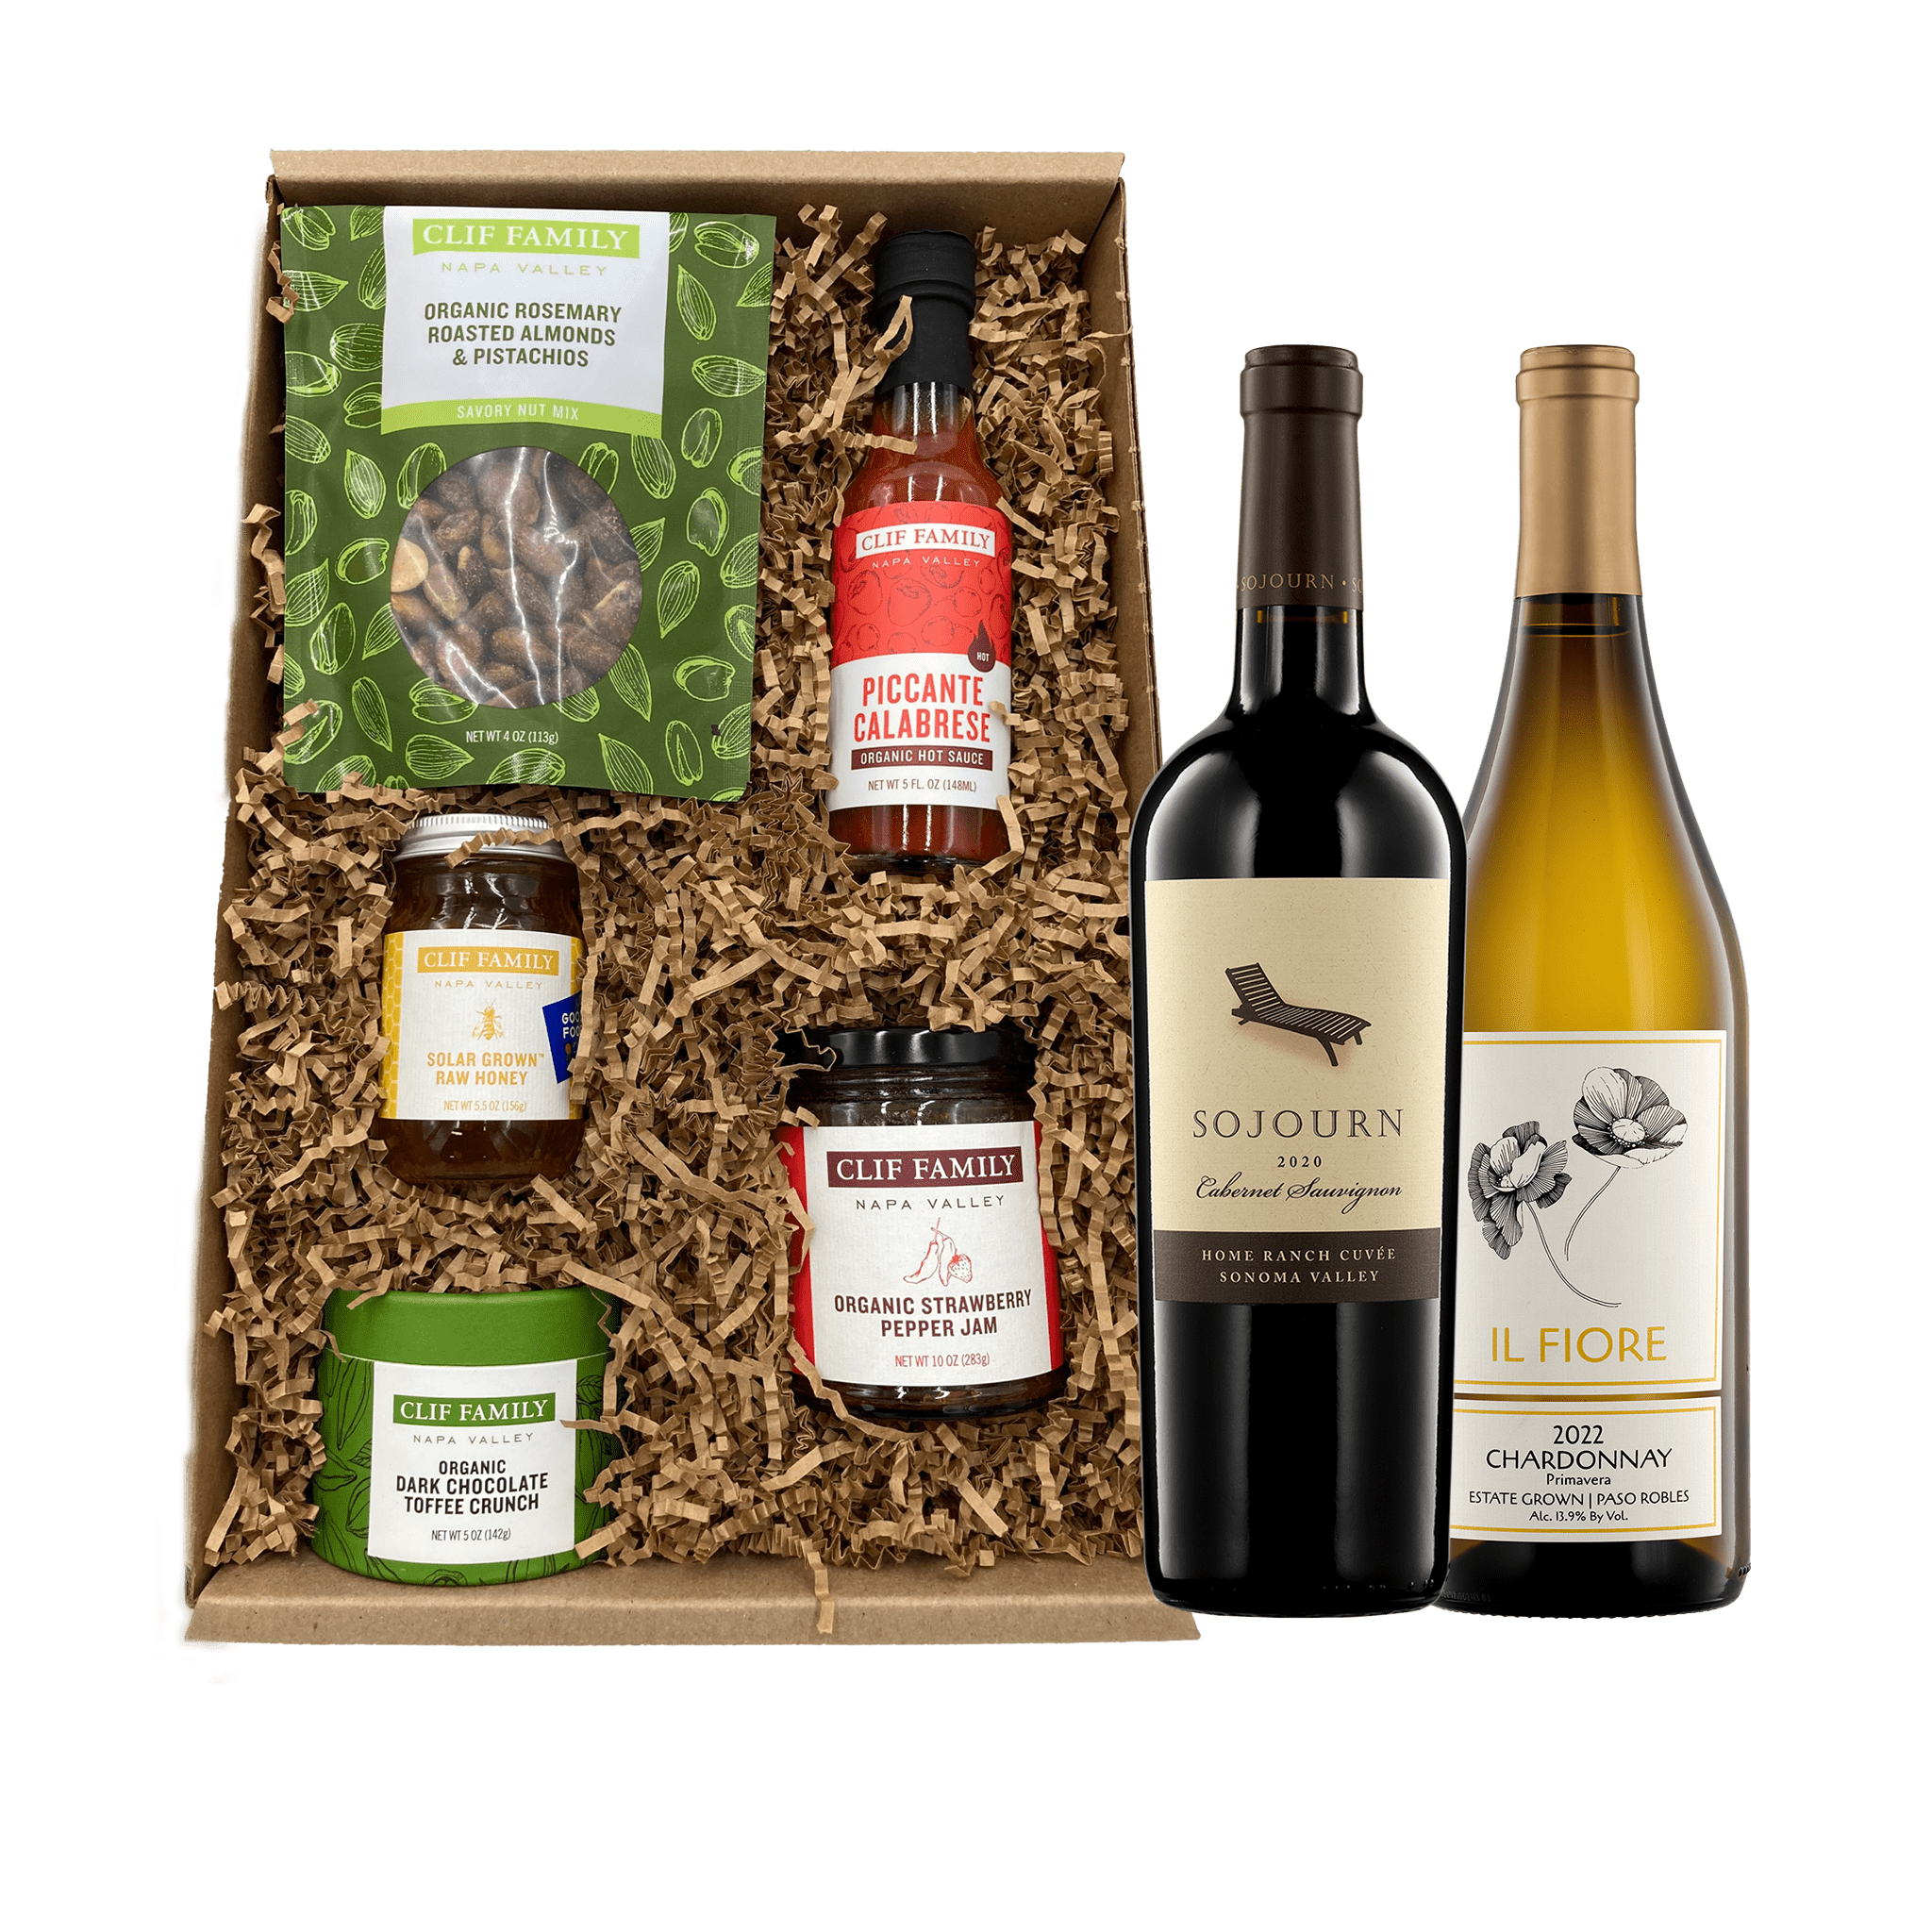 Wine Country Gift Box – Gold Medal Wine Club